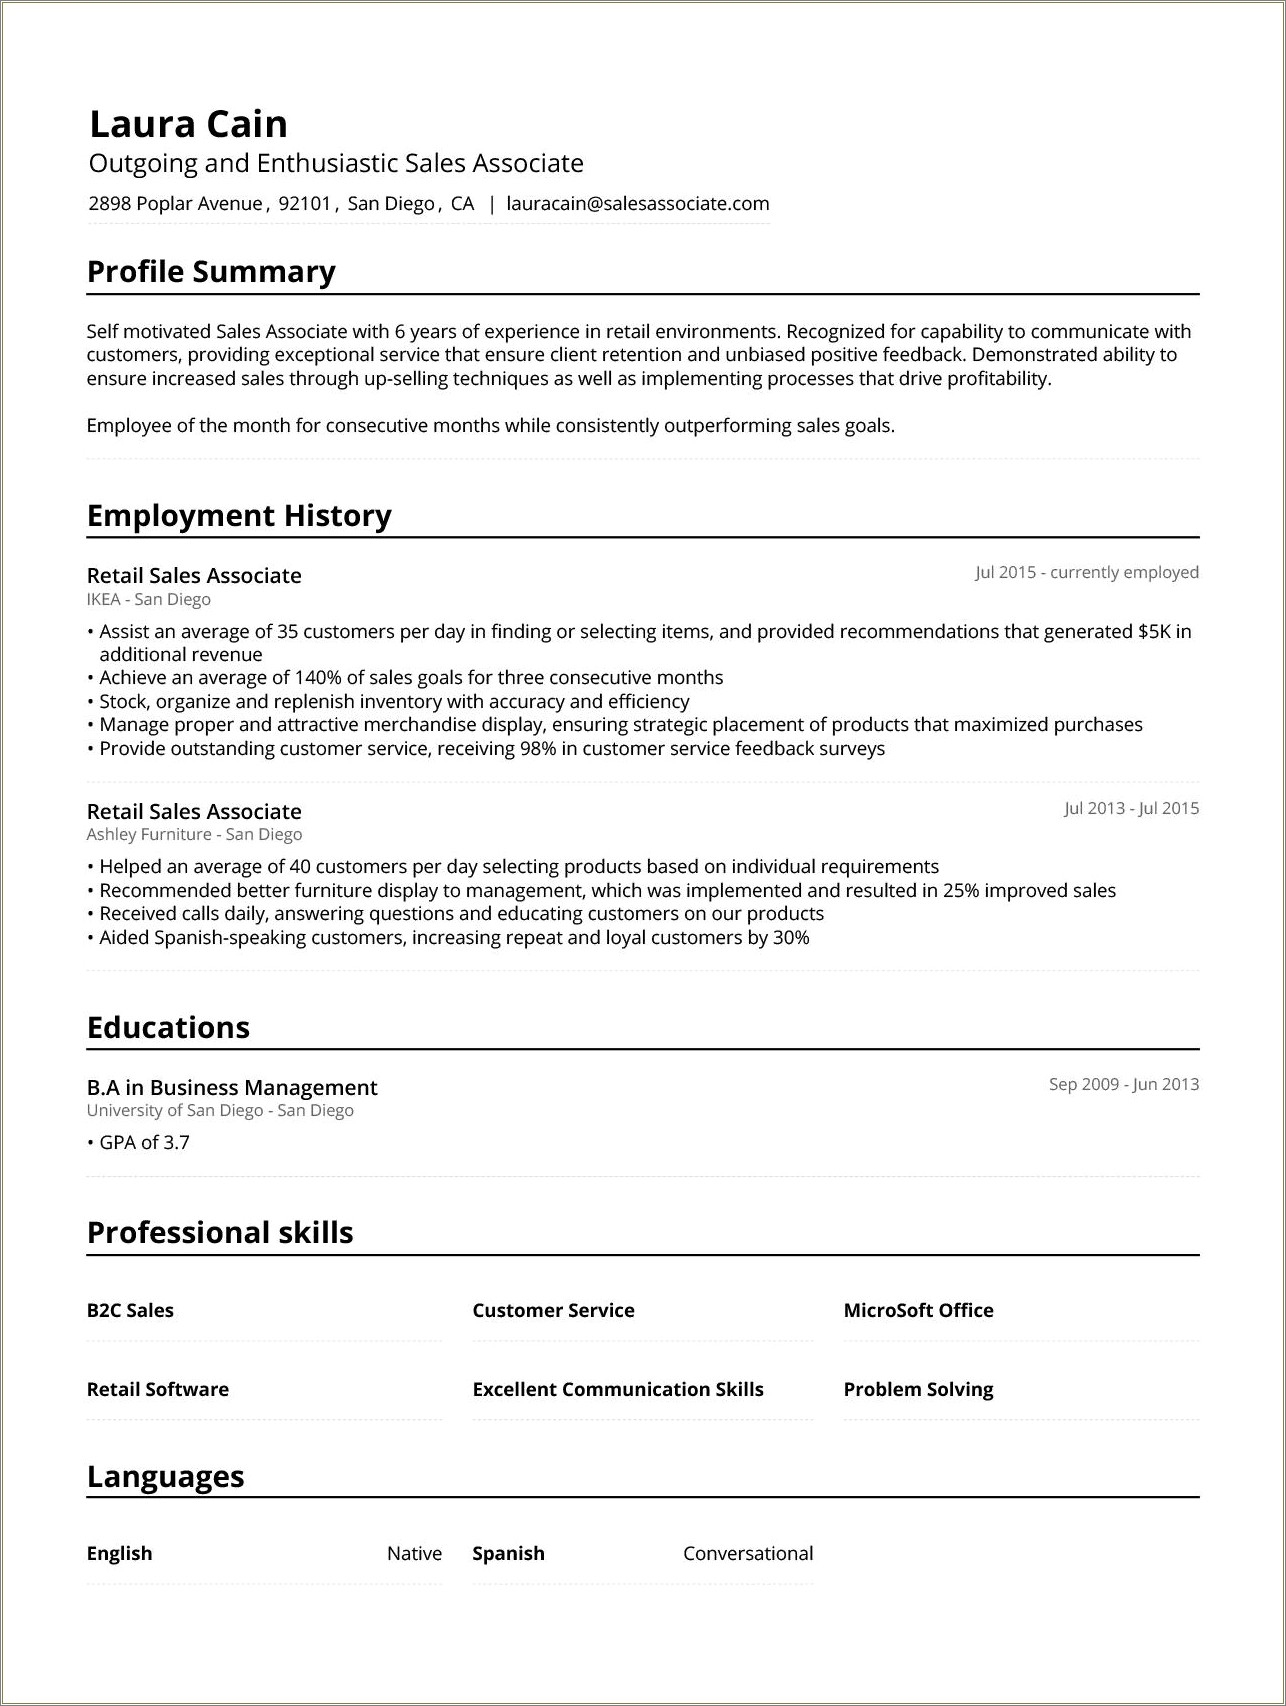 Examples Of Sale Summary For Resume